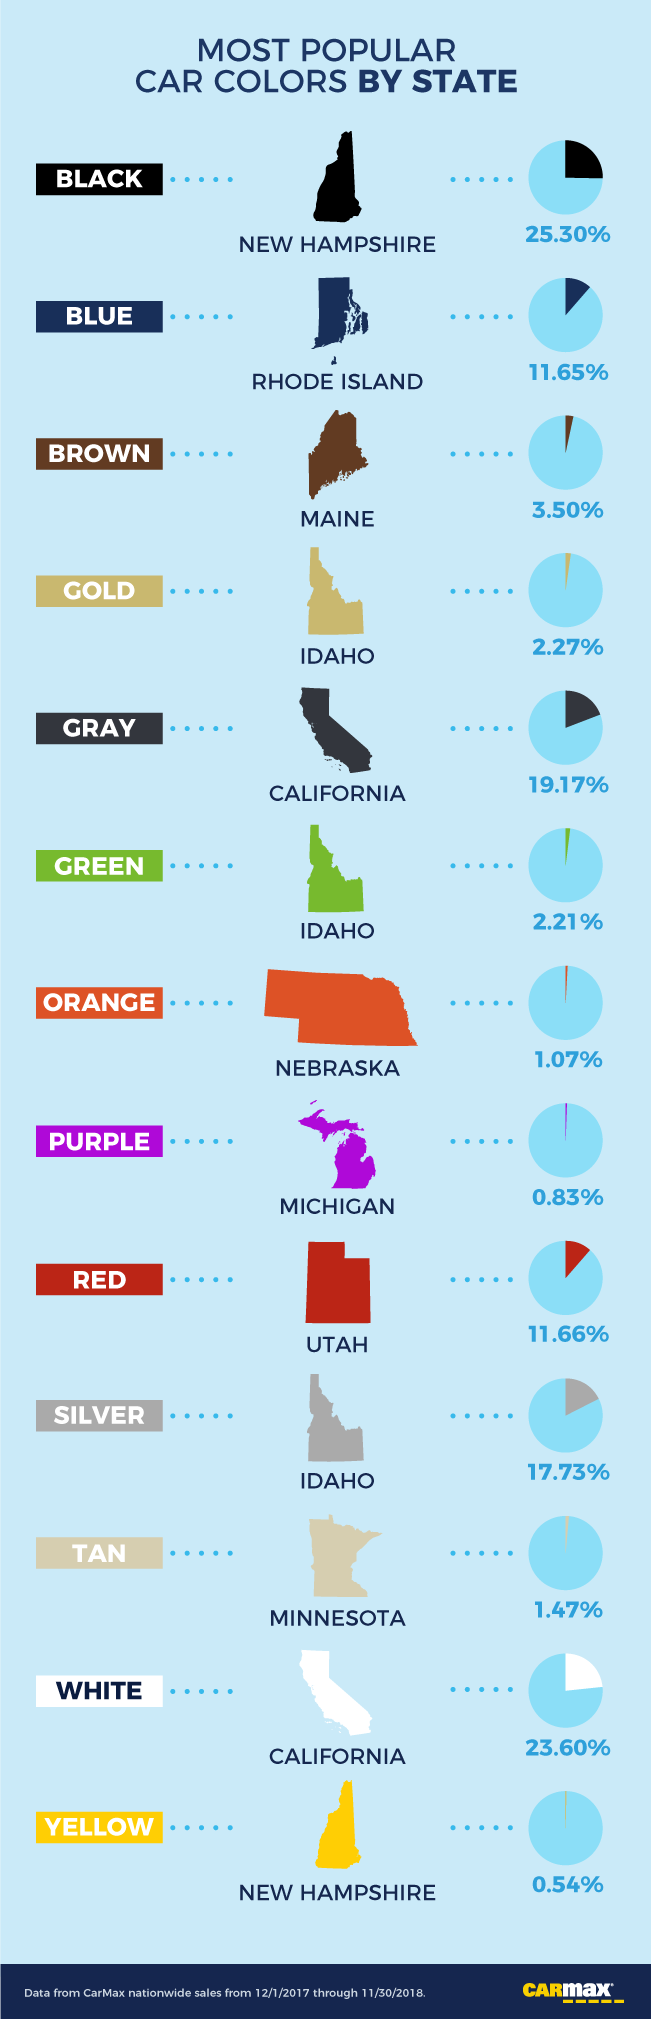 Most Popular Car Colors by State | CarMax